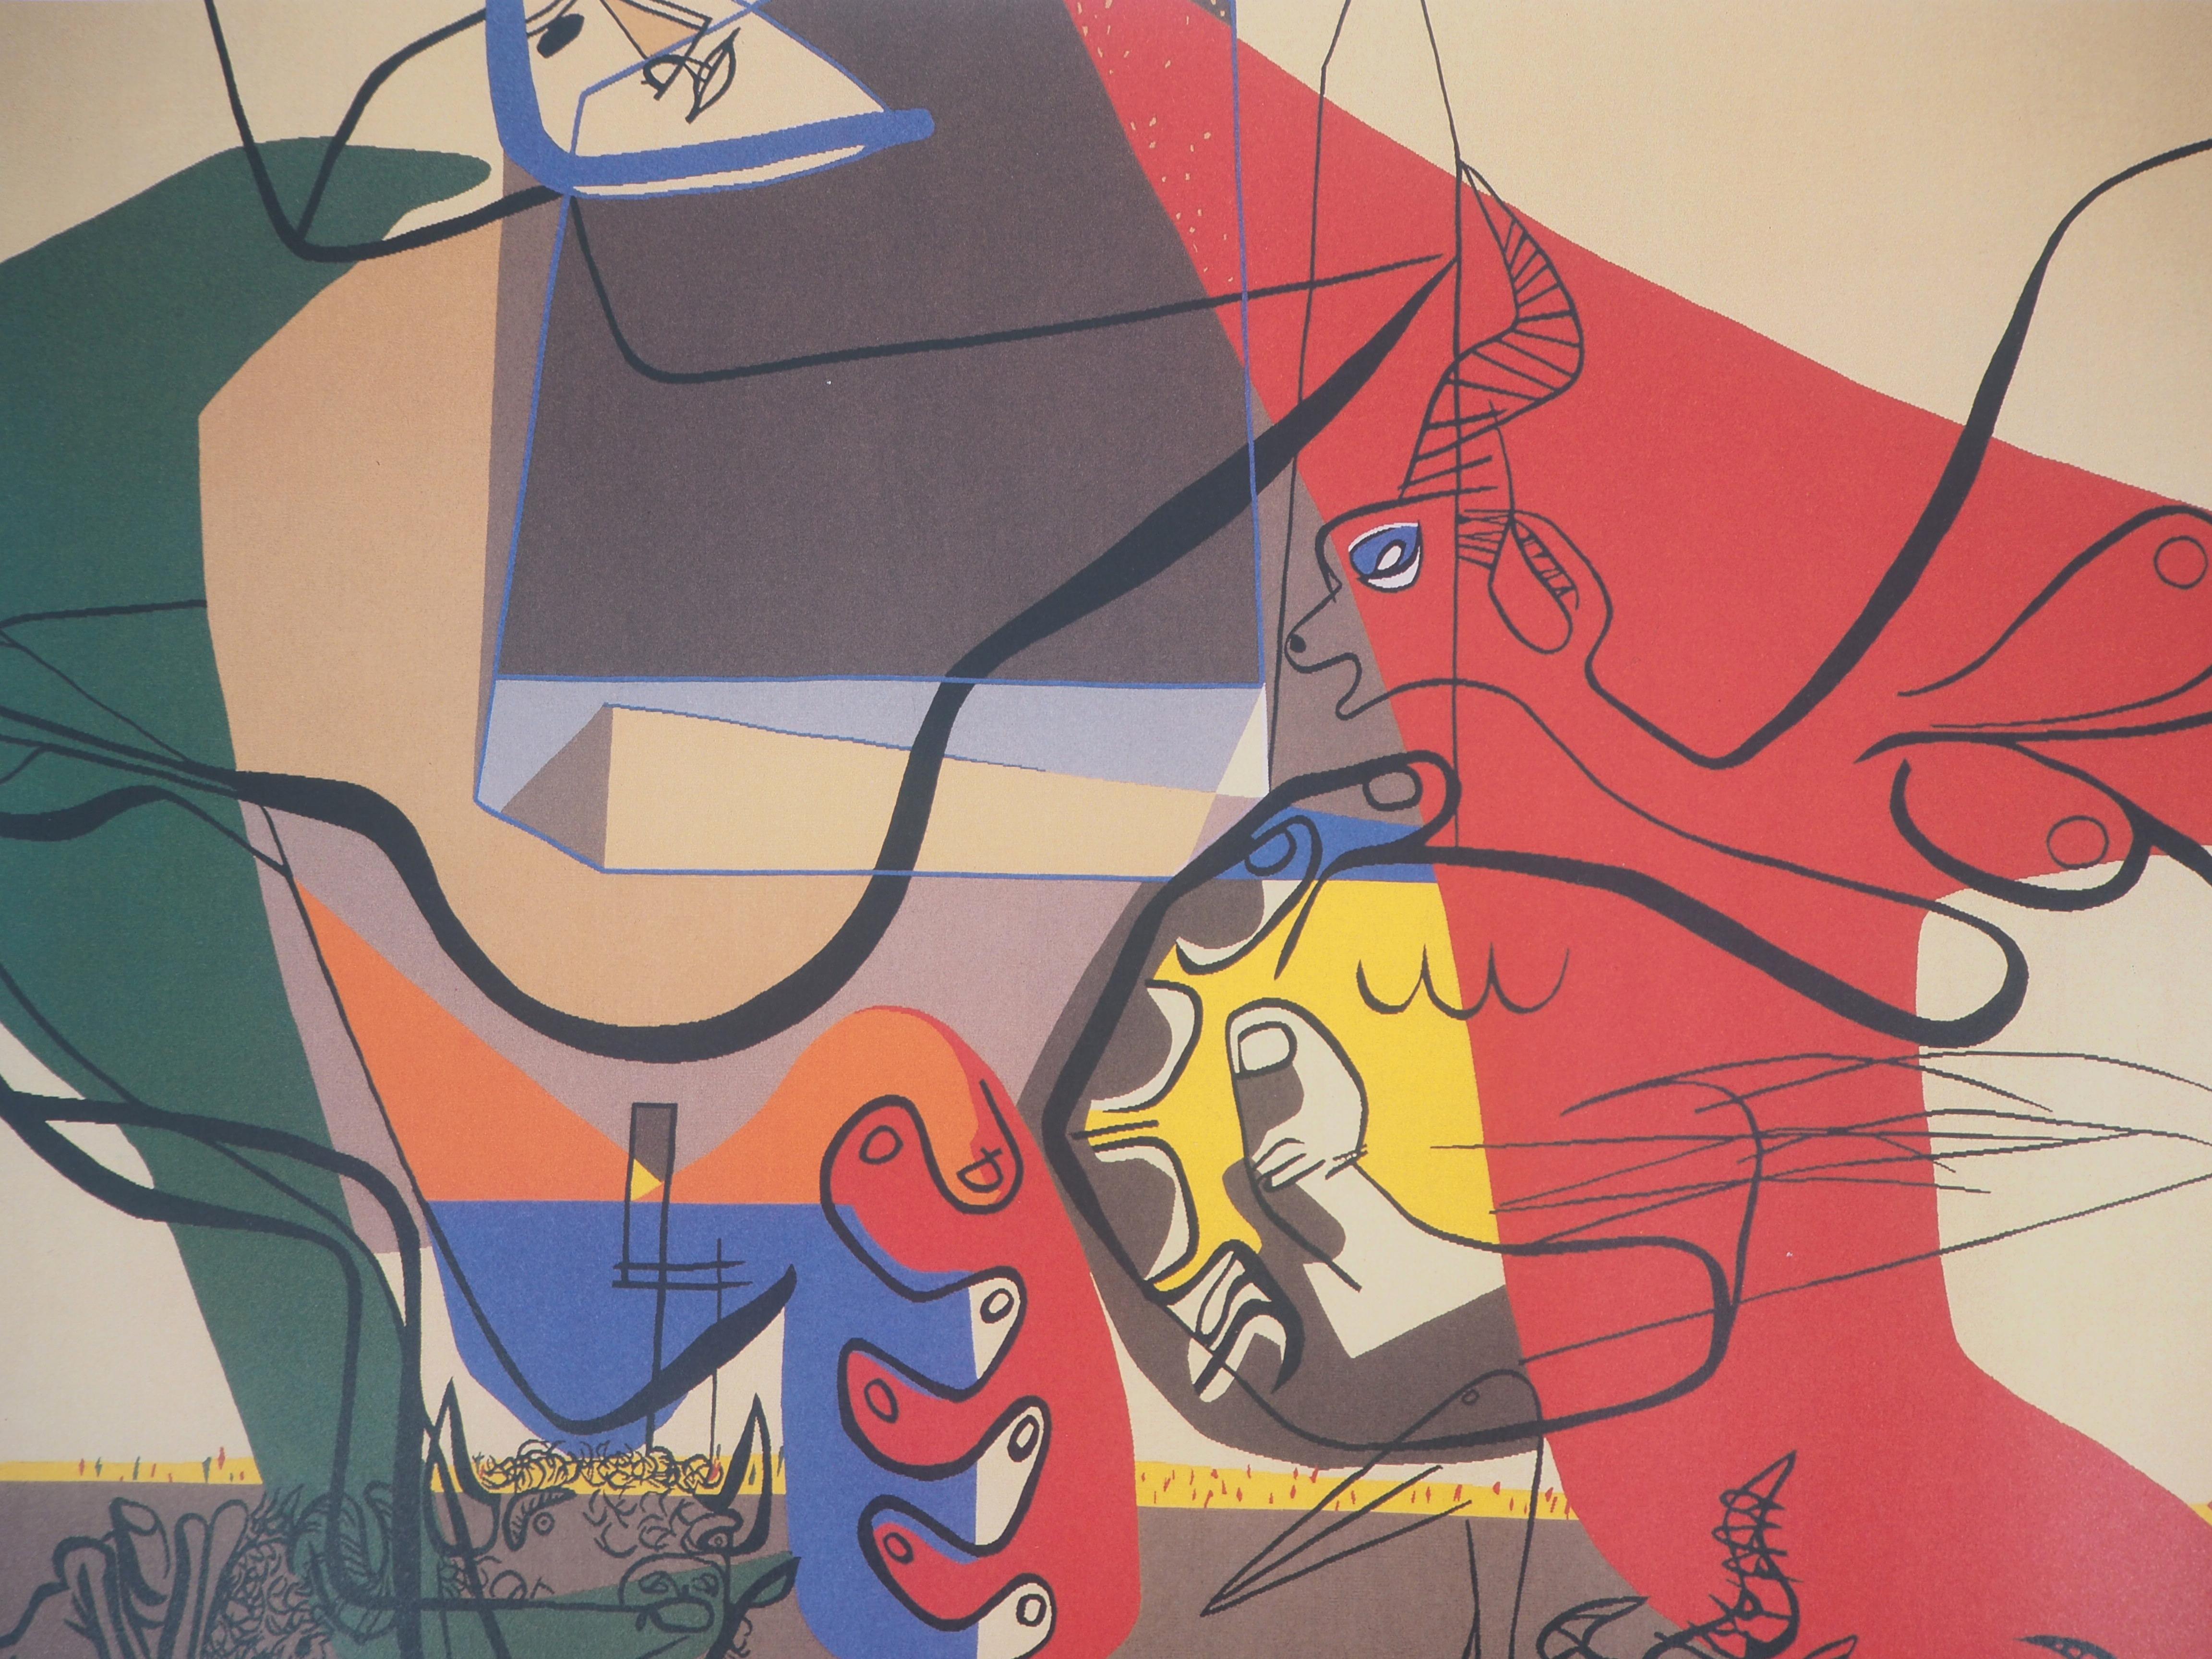 Presence (Man with Bull and Animals) - Original vintage poster, 1987 - Modern Print by Le Corbusier (after)